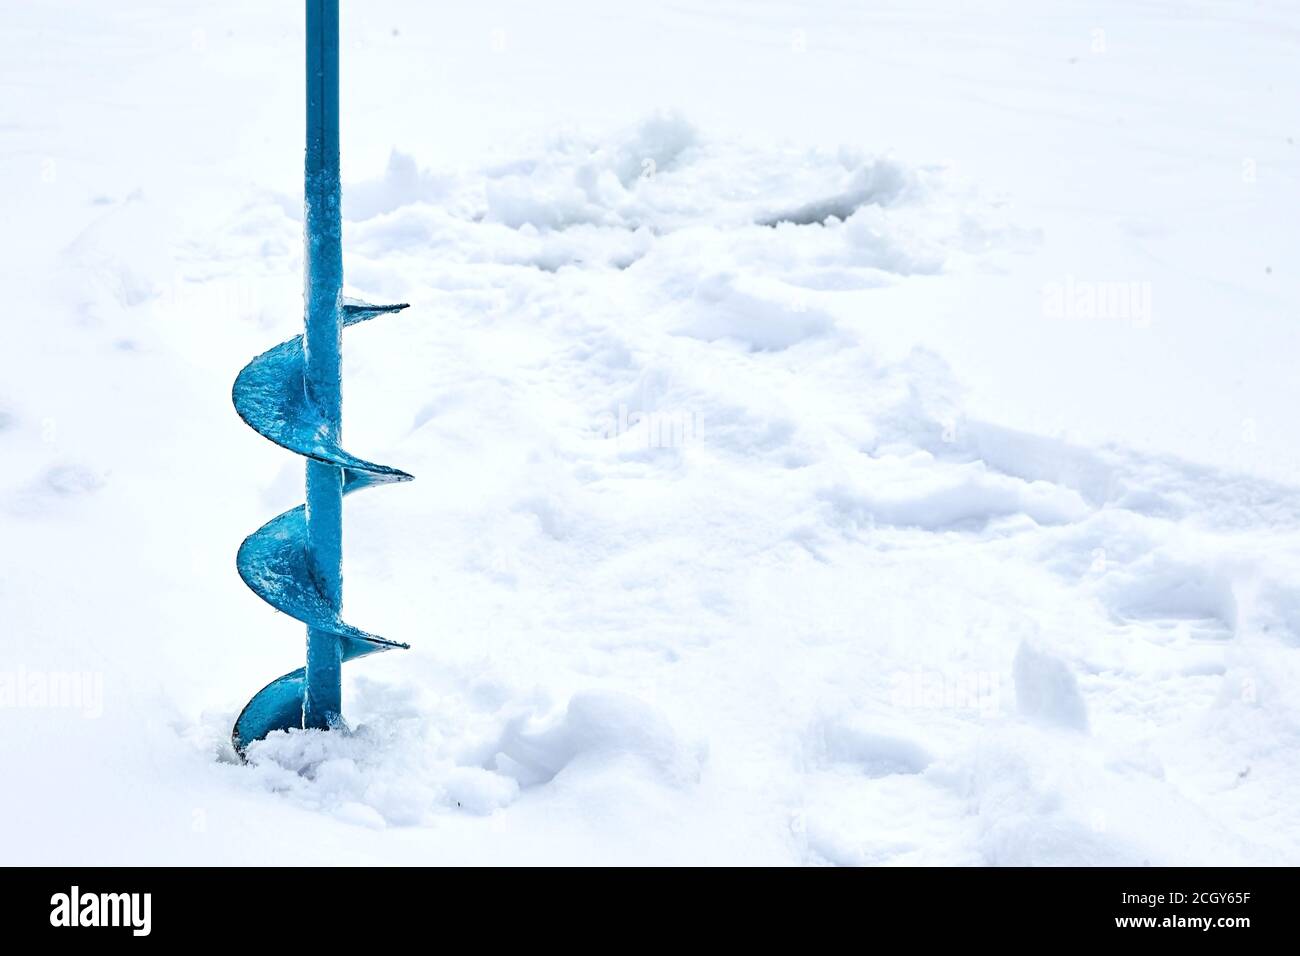 Hand operated ice auger used in ice fishing. Blue Metal Screw. Drill.  Hobbies, winter fishing on snowy lake Stock Photo - Alamy